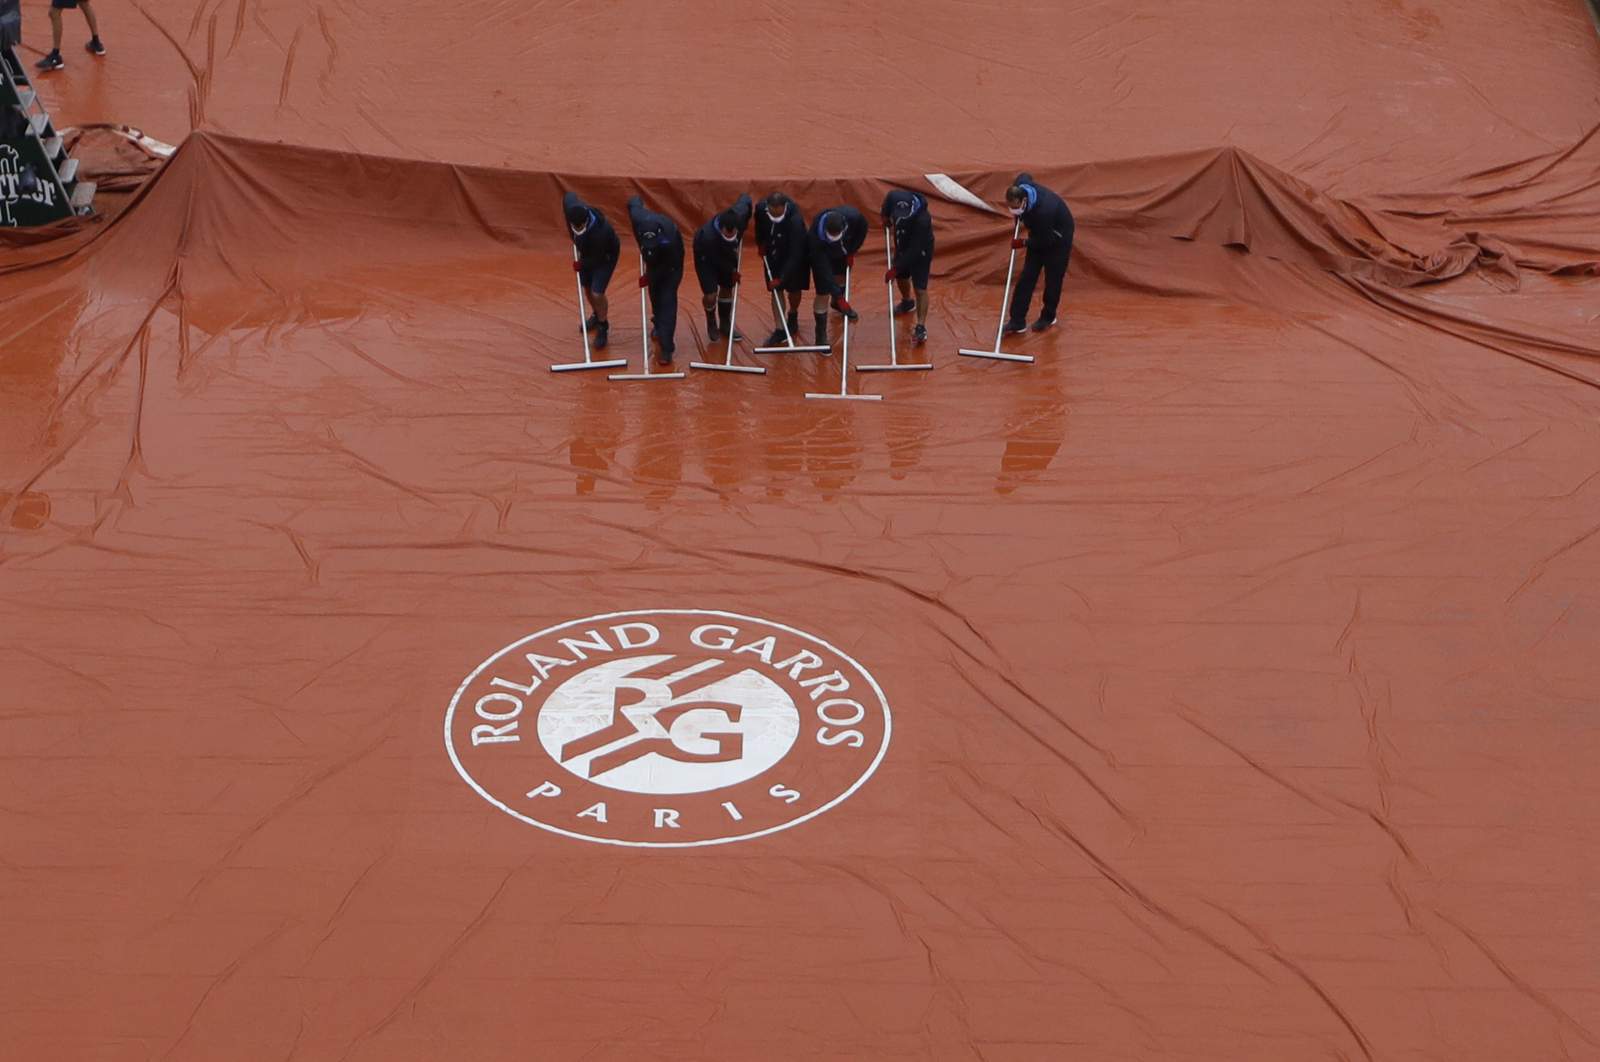 Investigation opened into match-fixing at French Open match